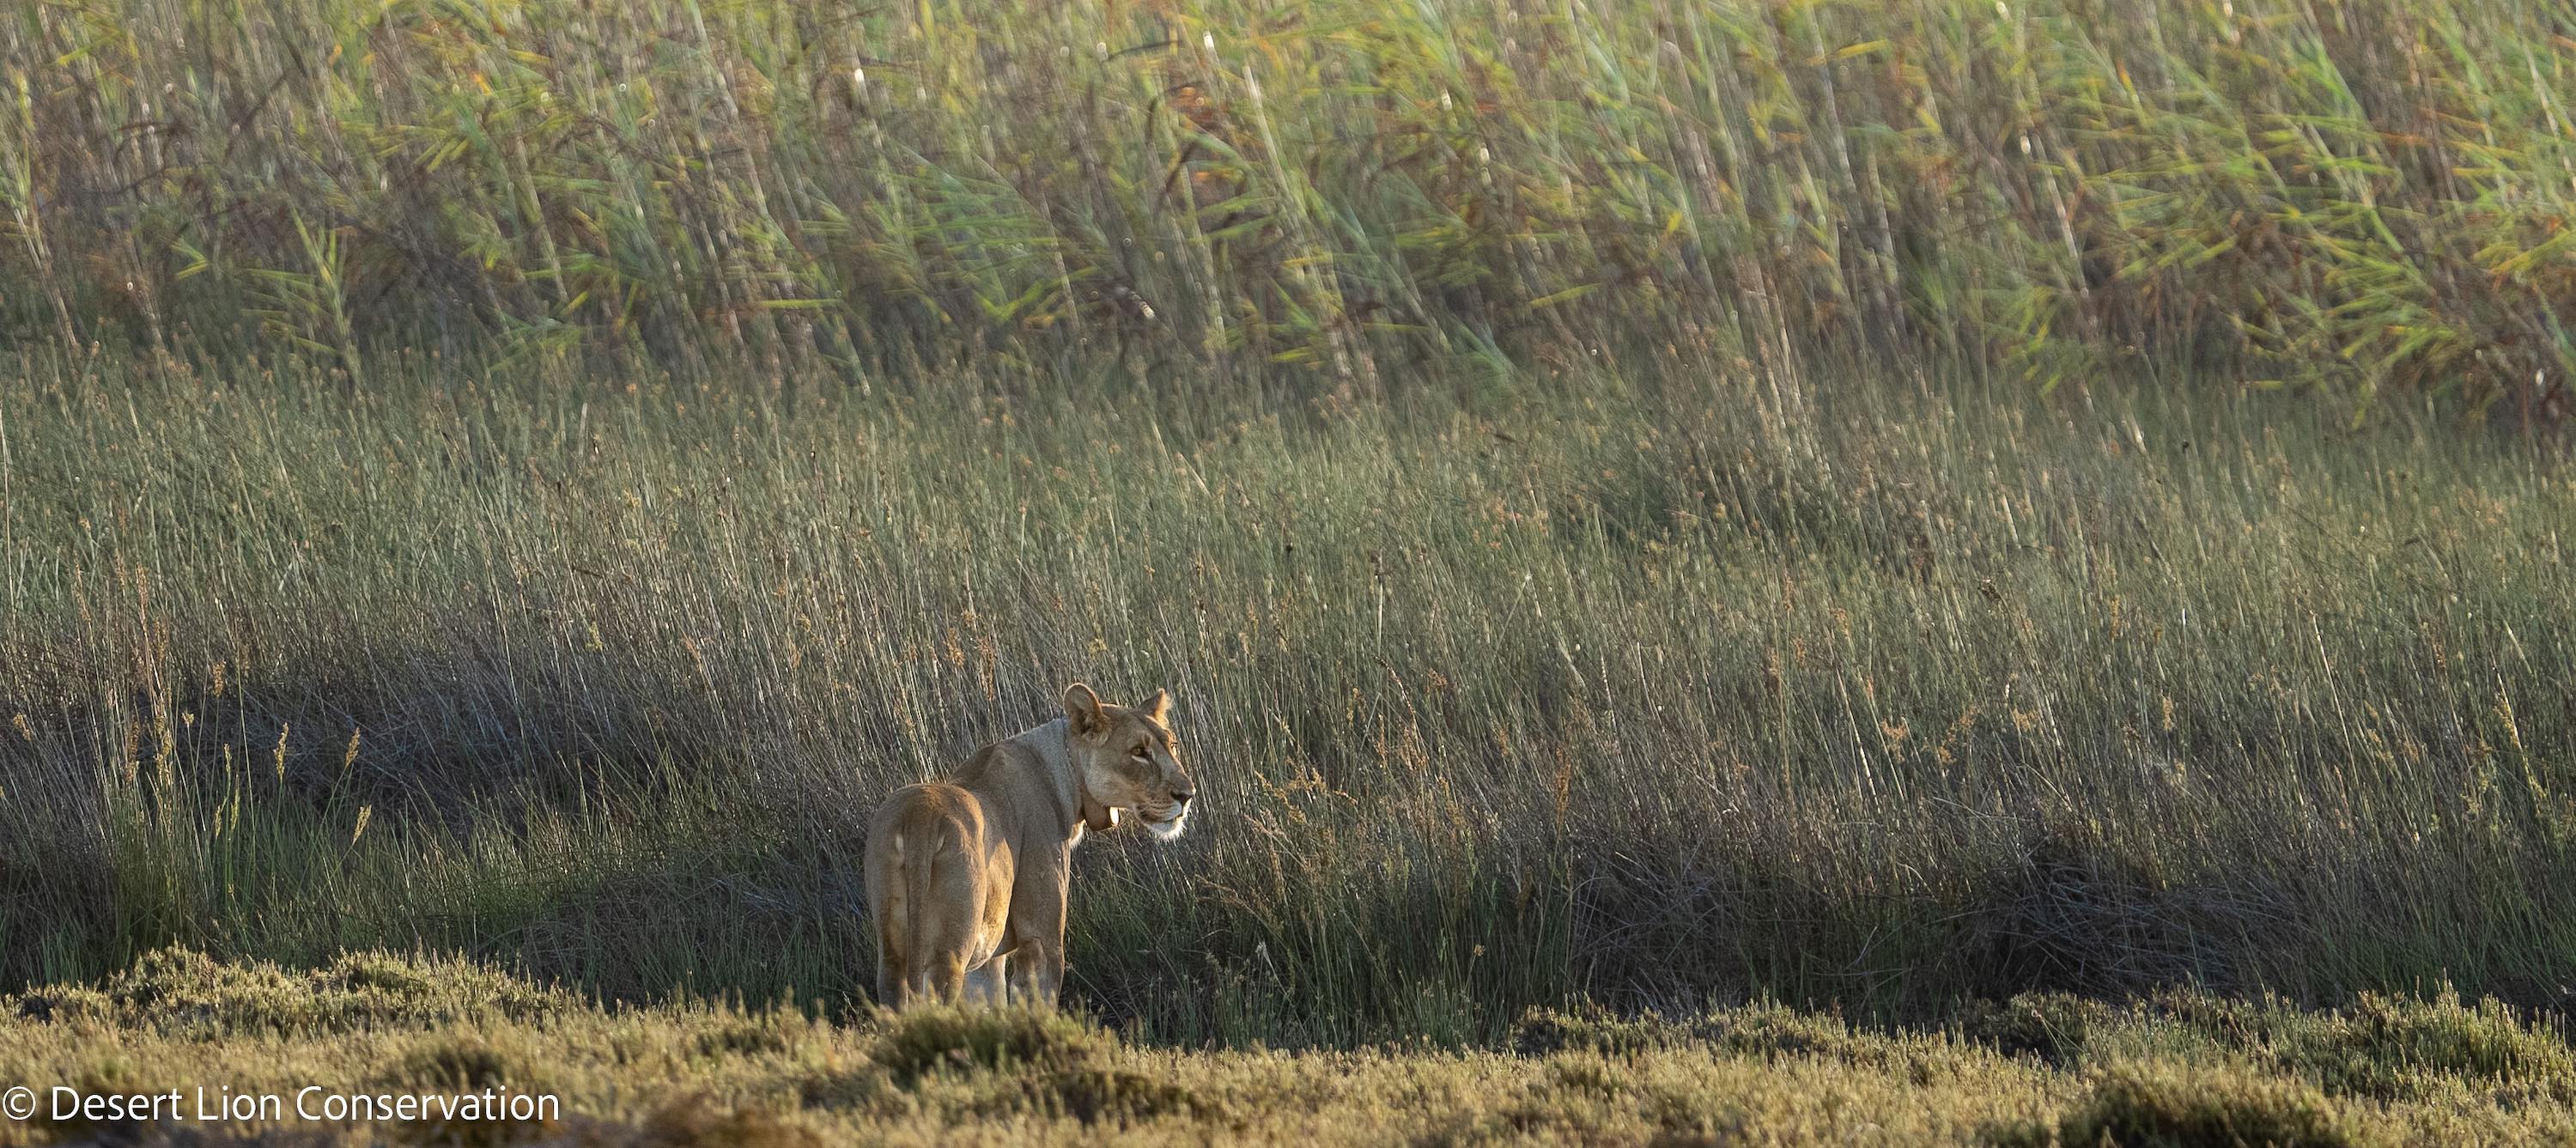 A lioness stands in front of a thick bed of reeds.